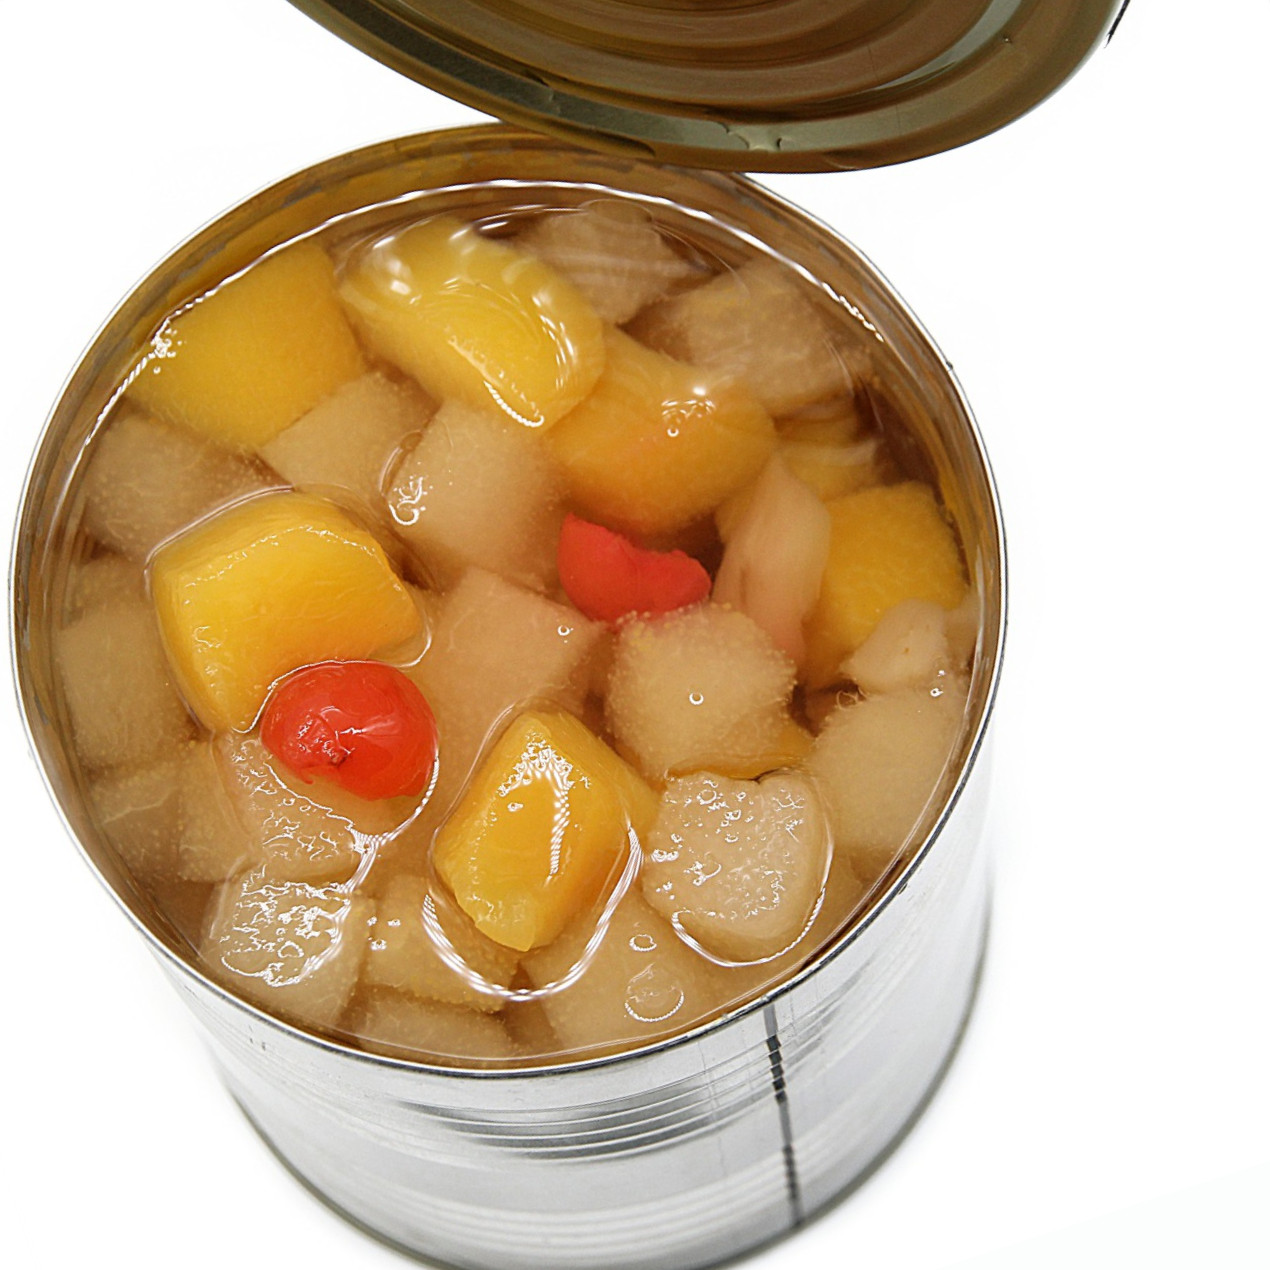 Canned-fruits-coctail